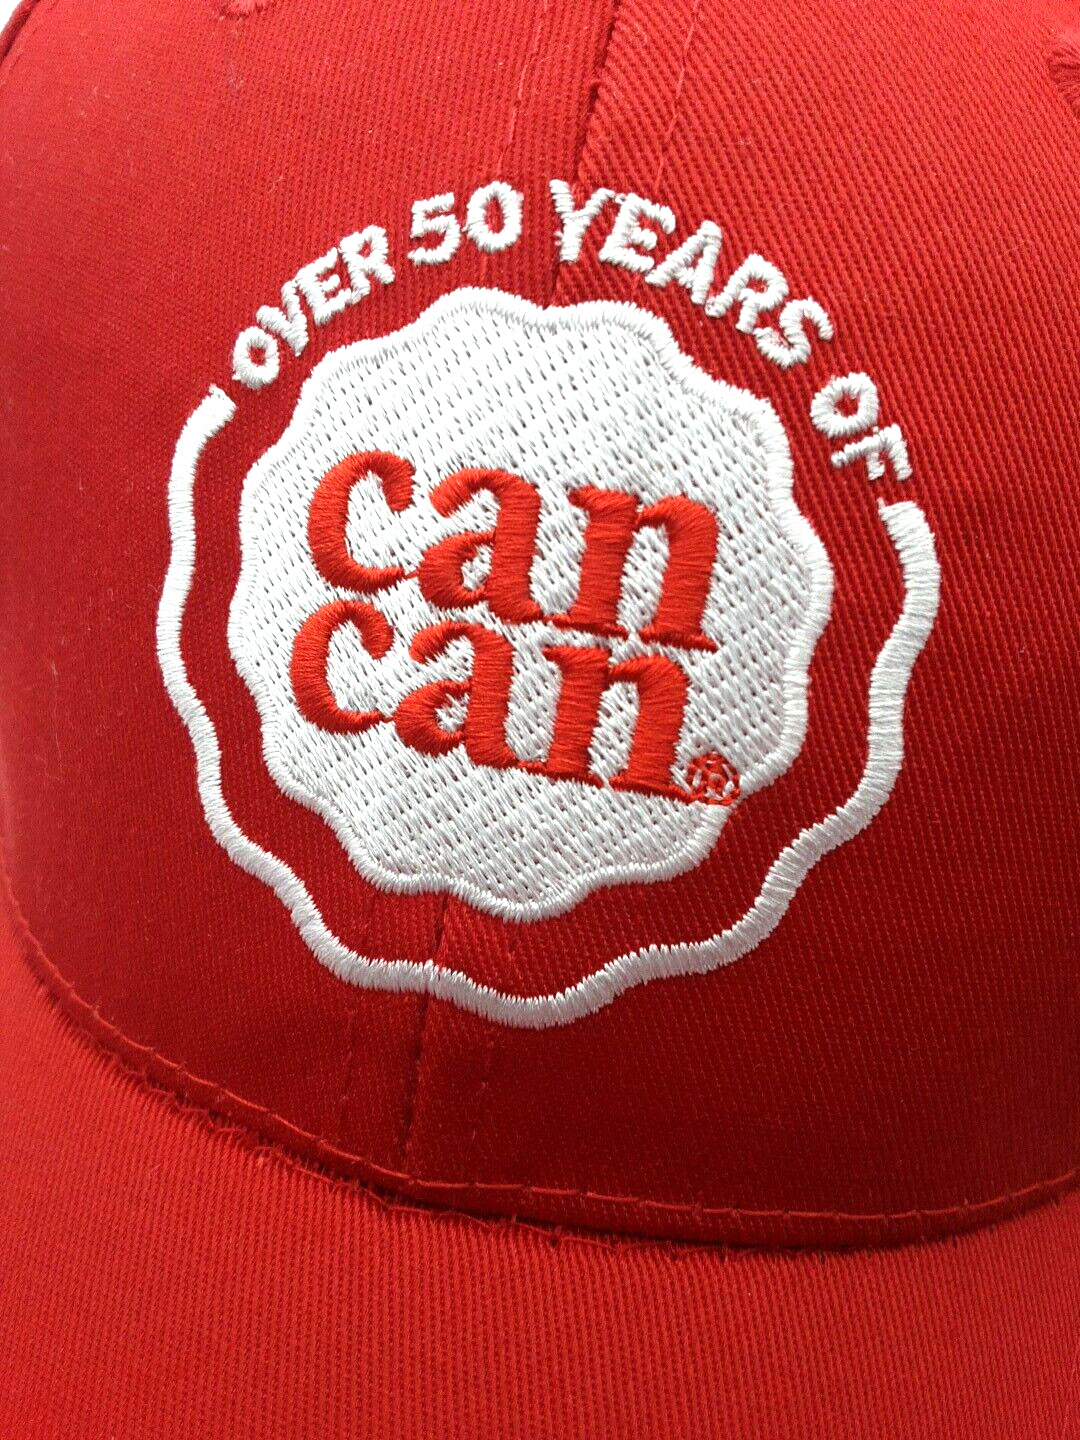 Shop Rite Over 50 Years Of Can Can  Red Adjustable Ball Hat Cap W/ Pin Shoprite